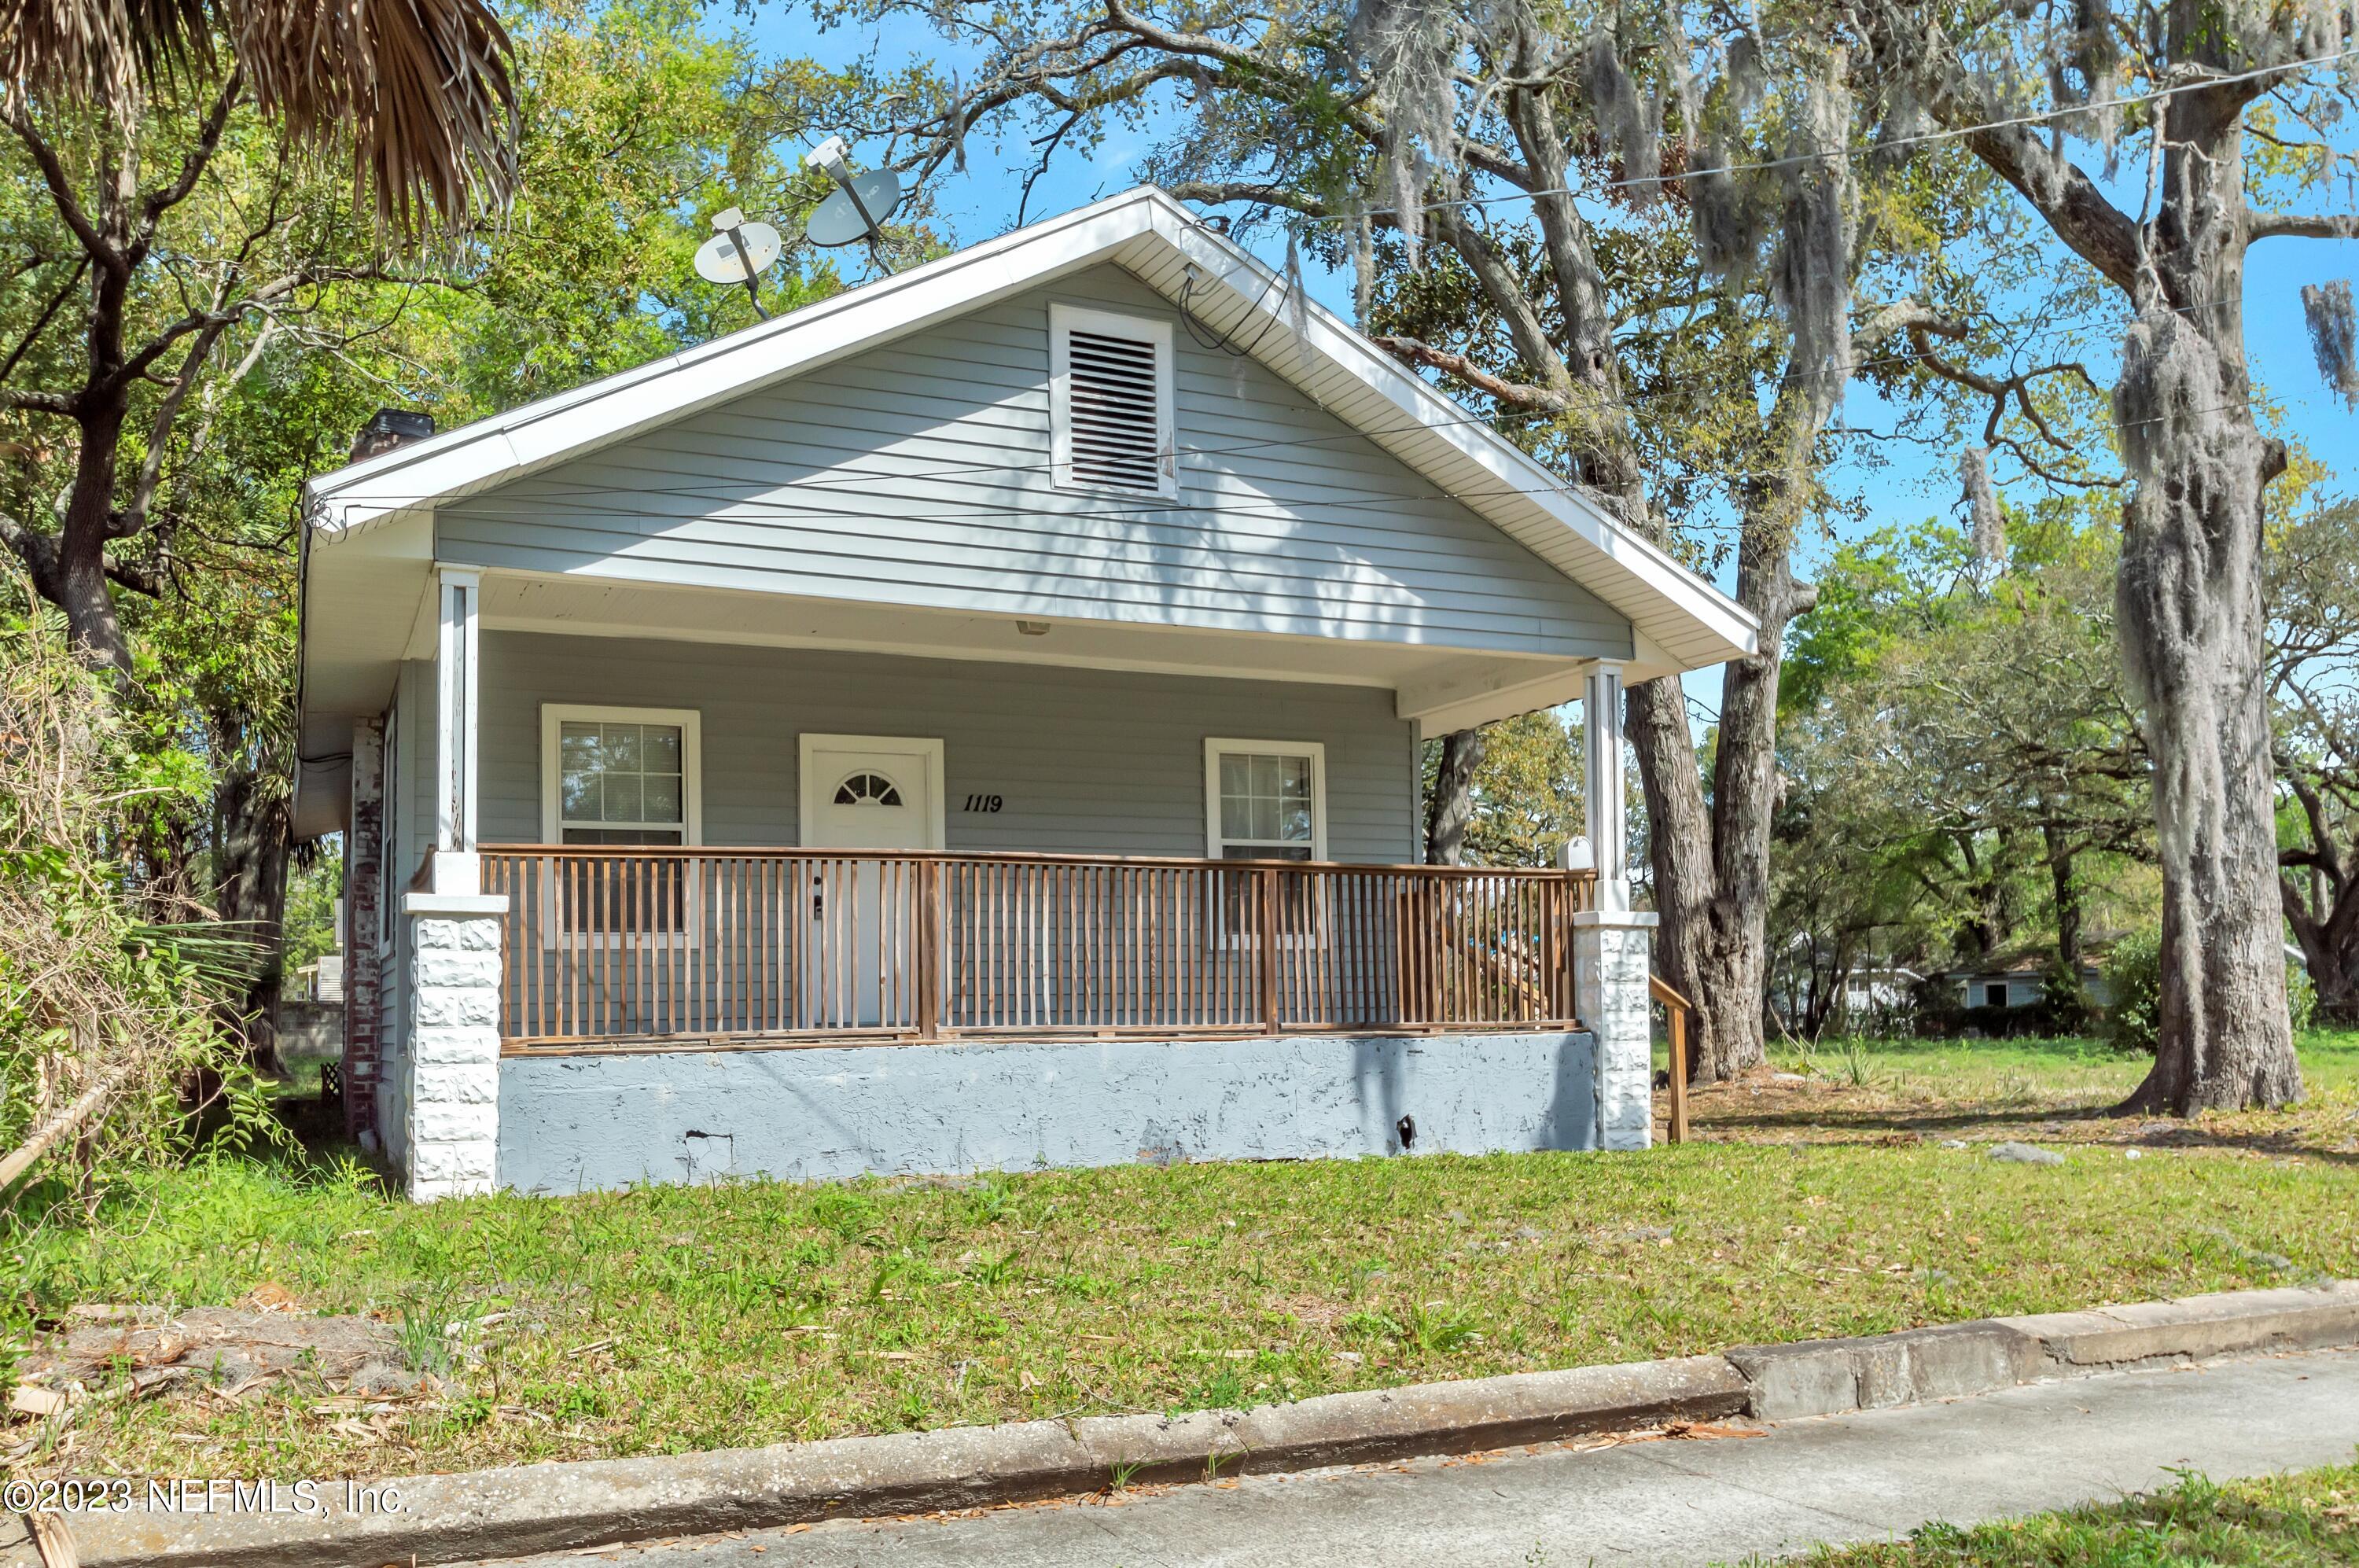 Jacksonville, FL home for sale located at 1119 E 12th Street, Jacksonville, FL 32206